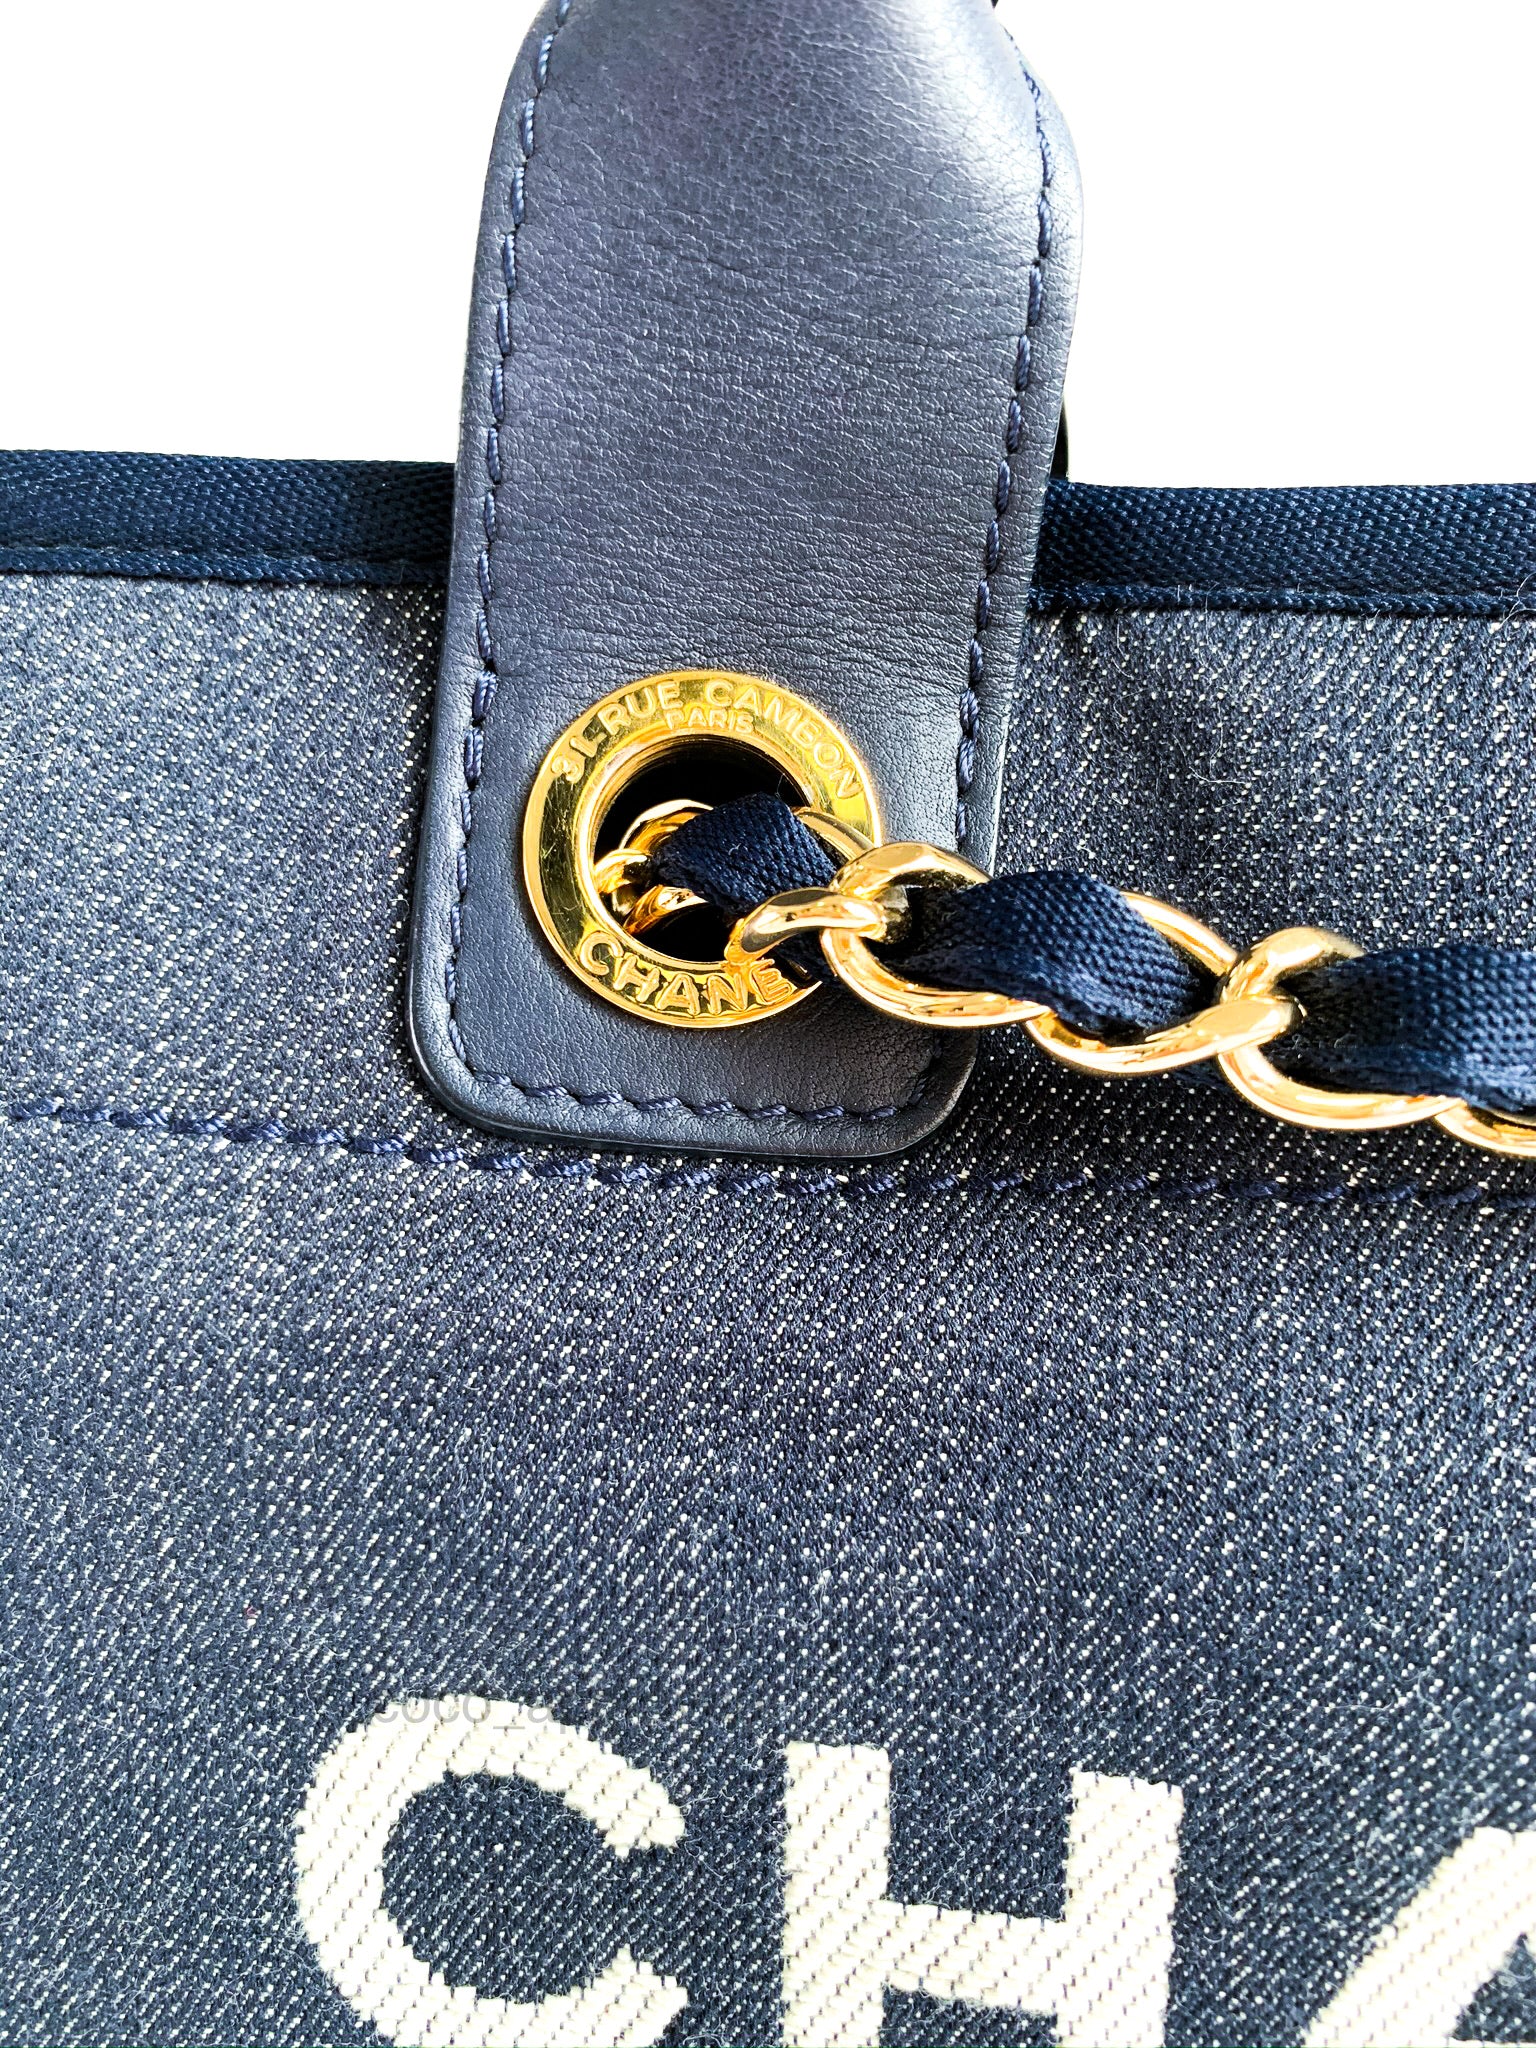 Chanel Canvas Large Deauville Tote Denim – Coco Approved Studio